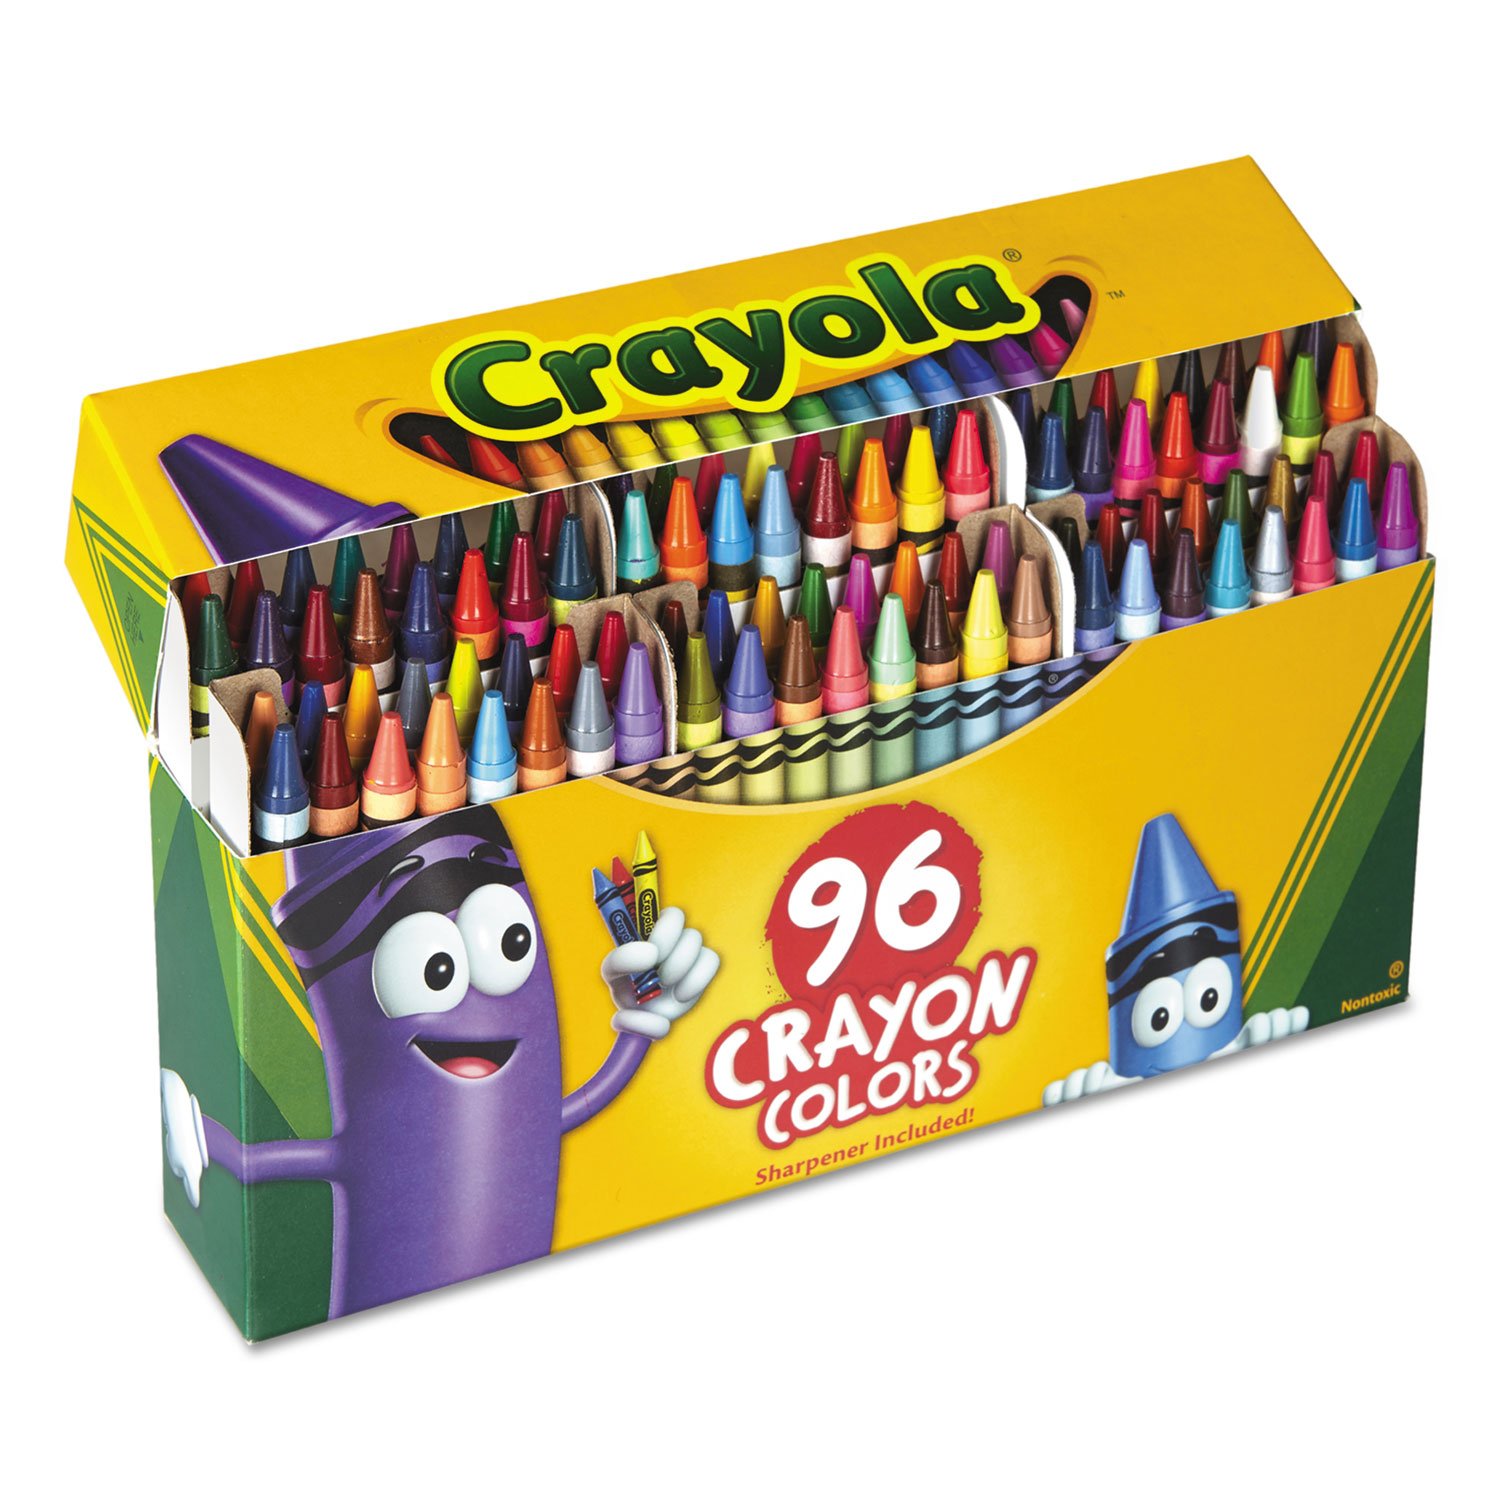 Crayola Classic Color Crayons Package 96 Colors/box (cyo520096 Clean-it-supply Age 3+ Item Size 8.5 X 5 X 1.7 Inches Item Weight 0.5kg